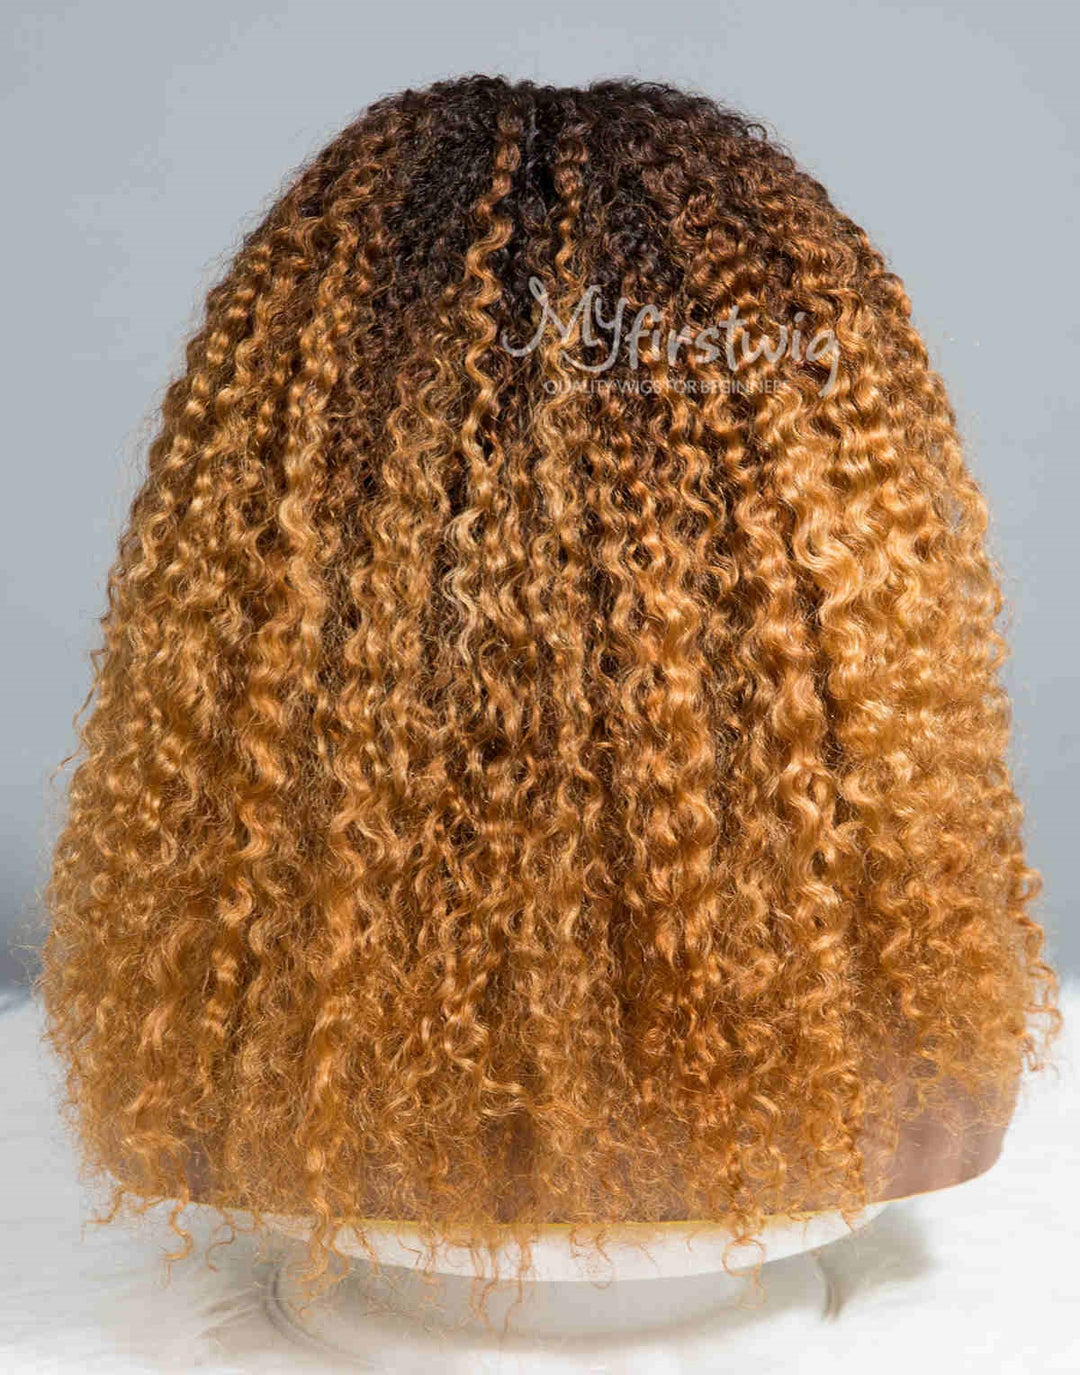 LEO - ZODIAC COLLECTION HUMAN HAIR OMBRE CURLY (3B-3C) WIG - ZC012